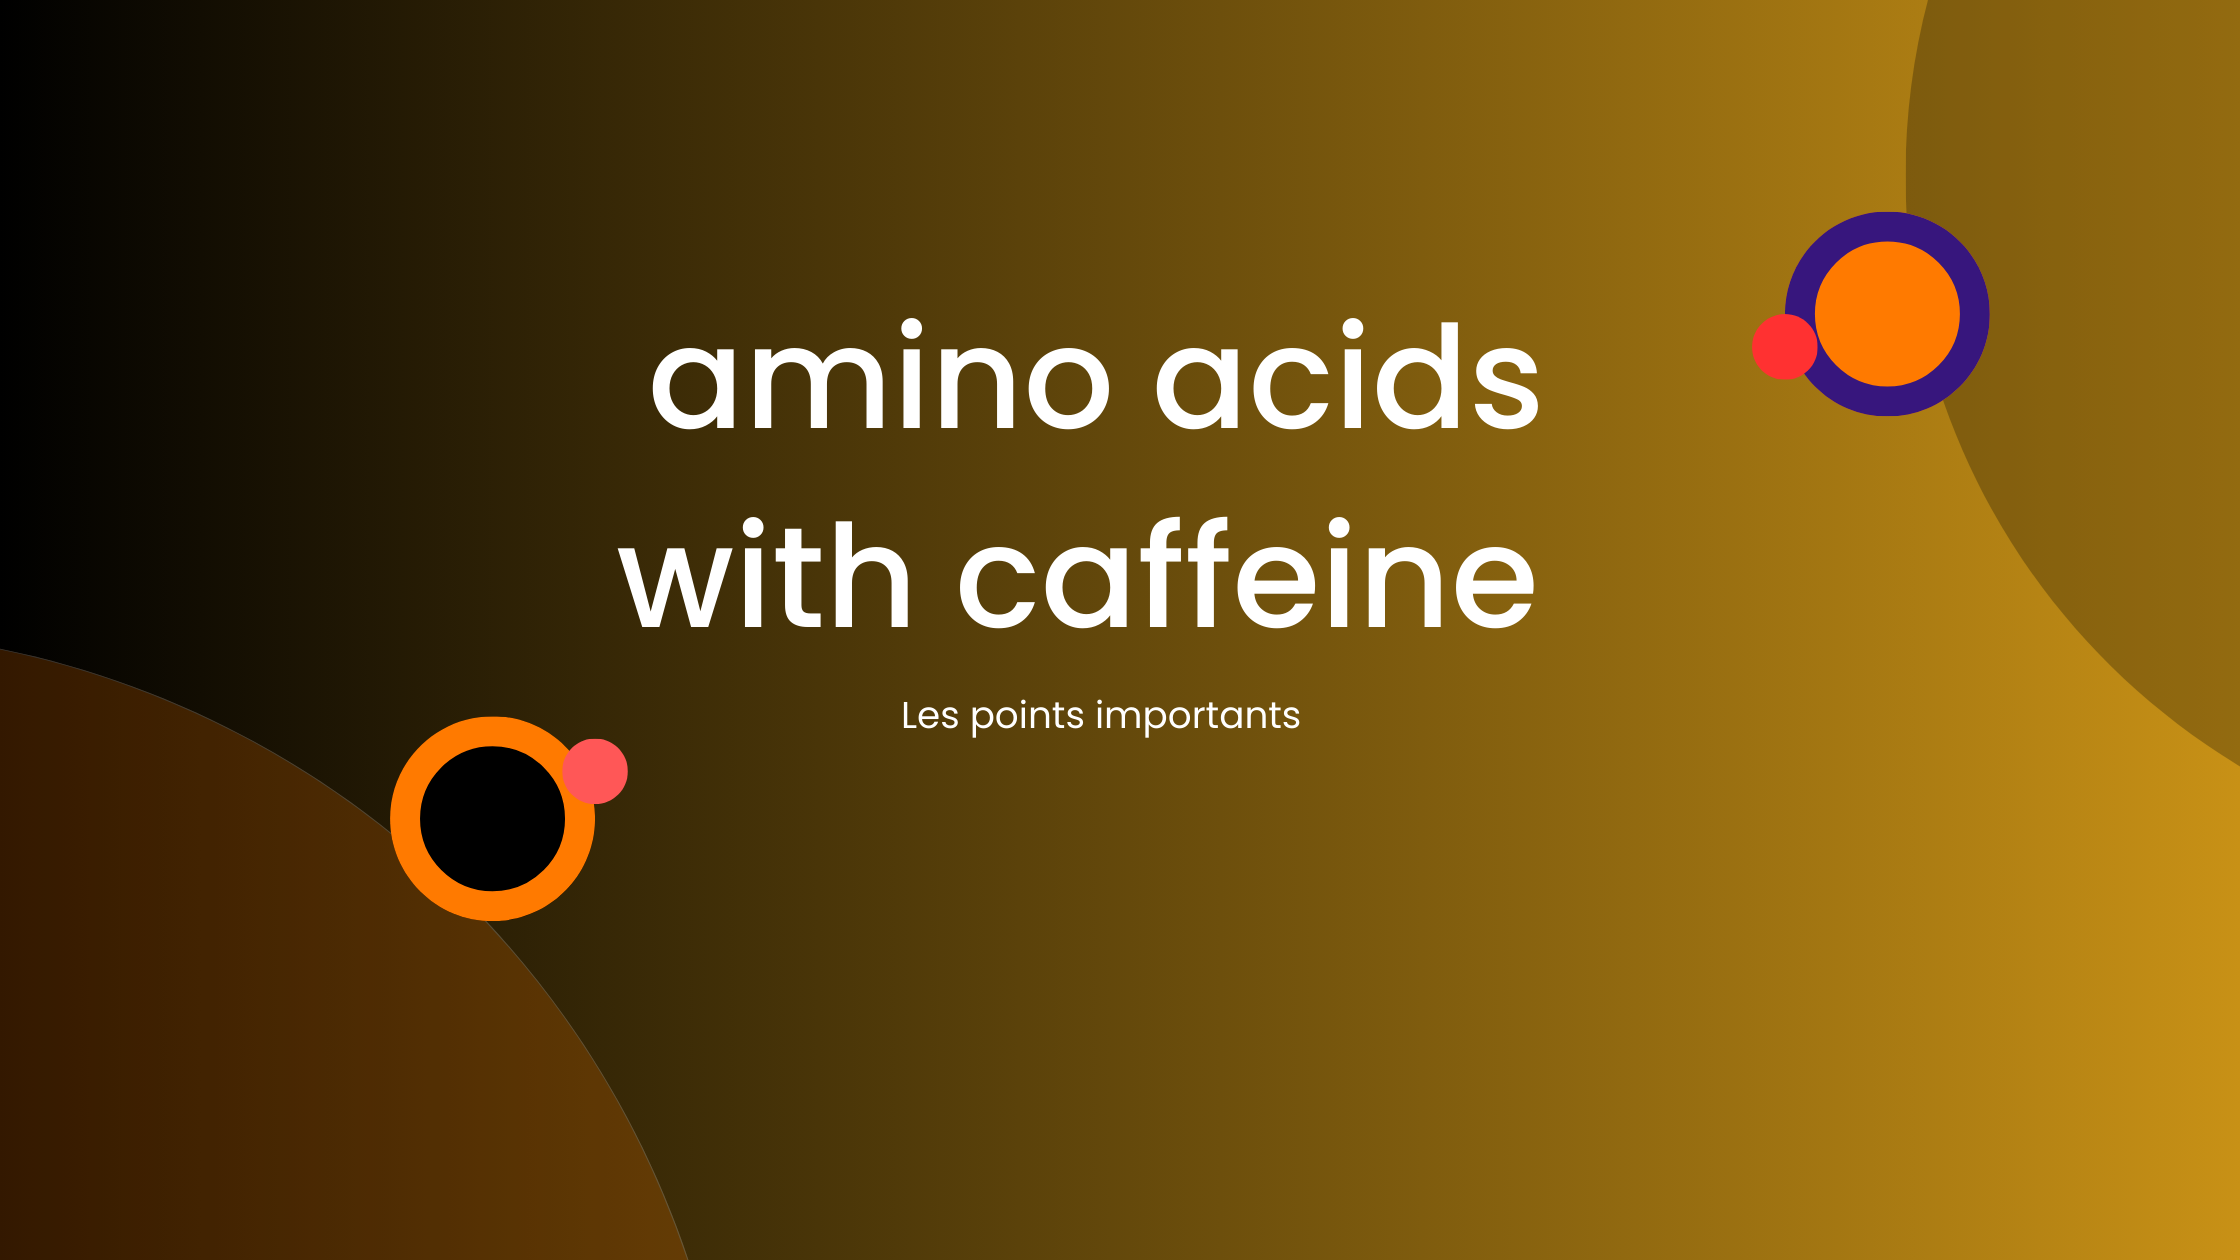 amino acids with caffeine | Les points importants